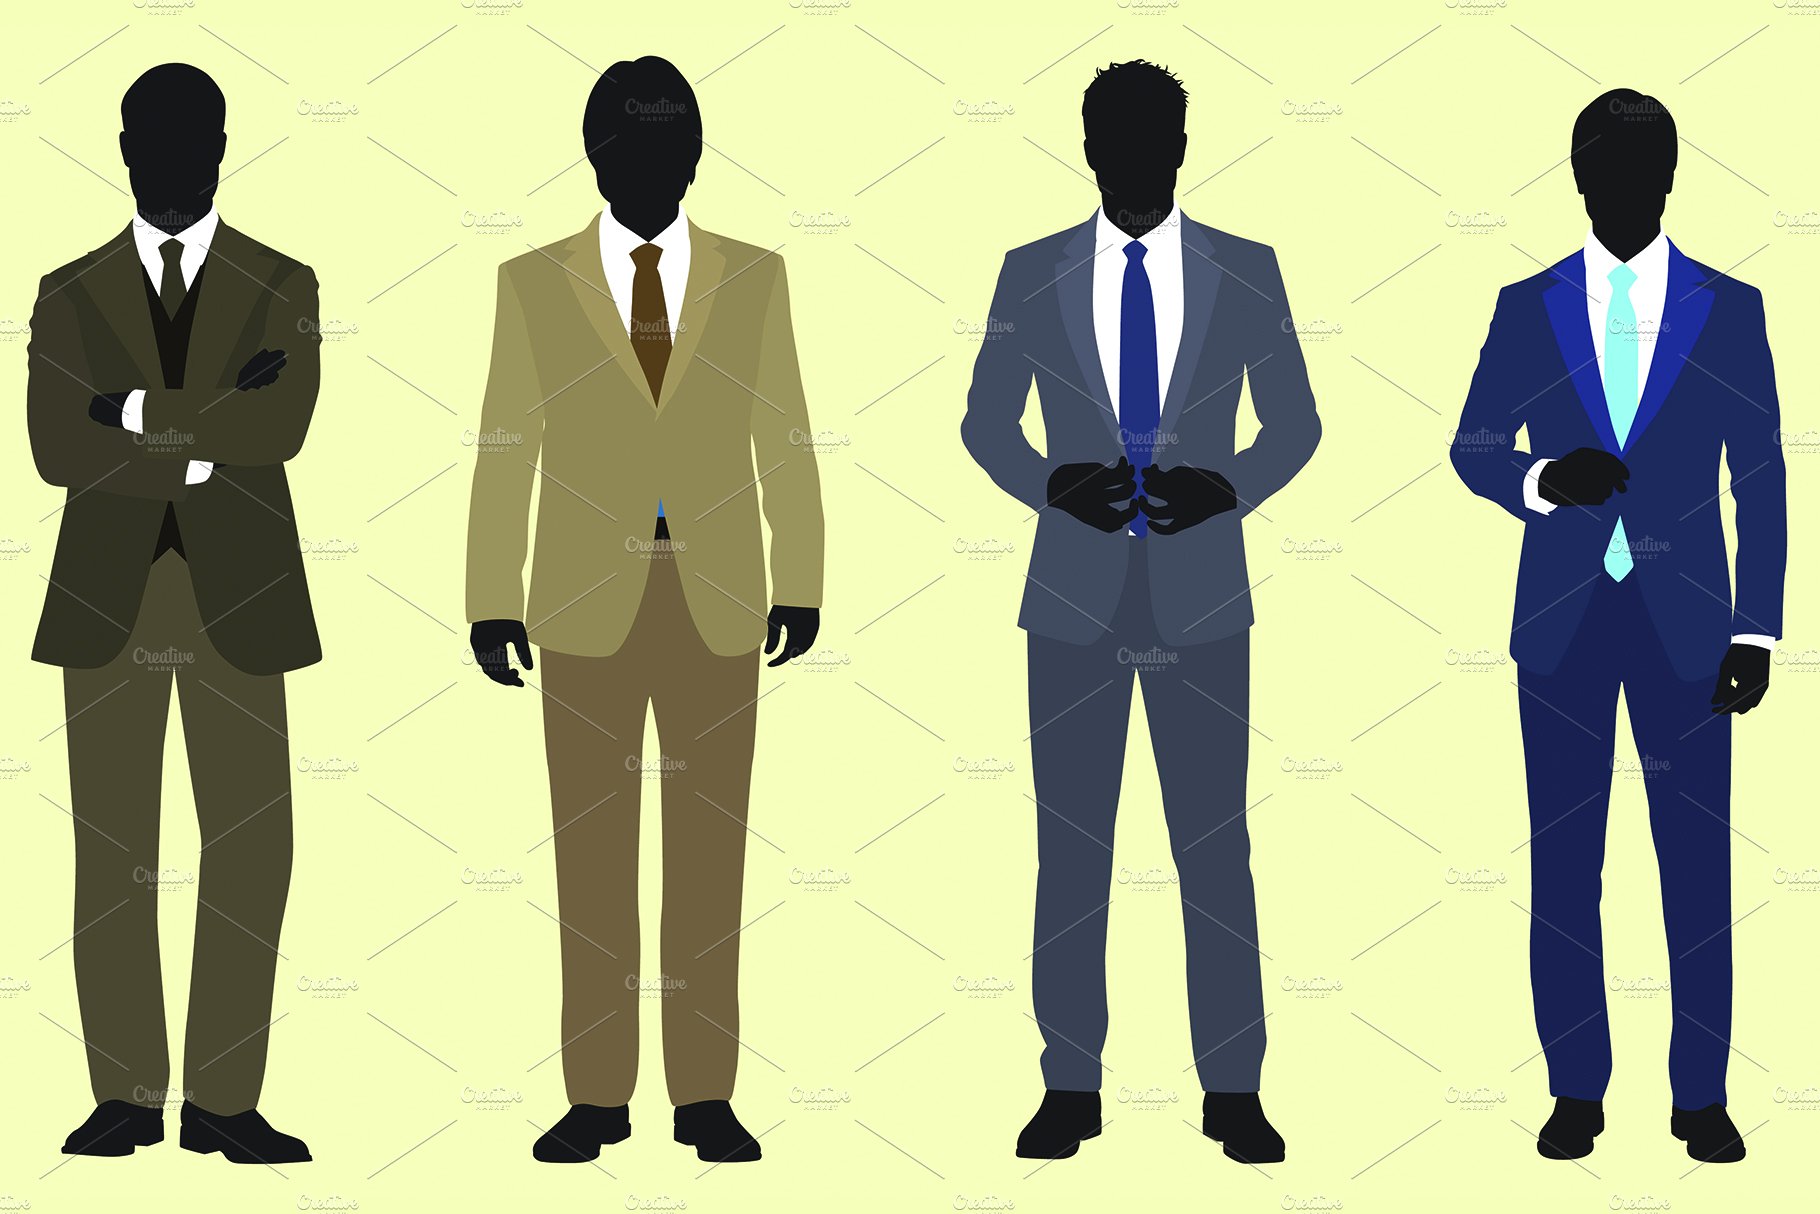 Well-dressed Men in Silhouette cover image.